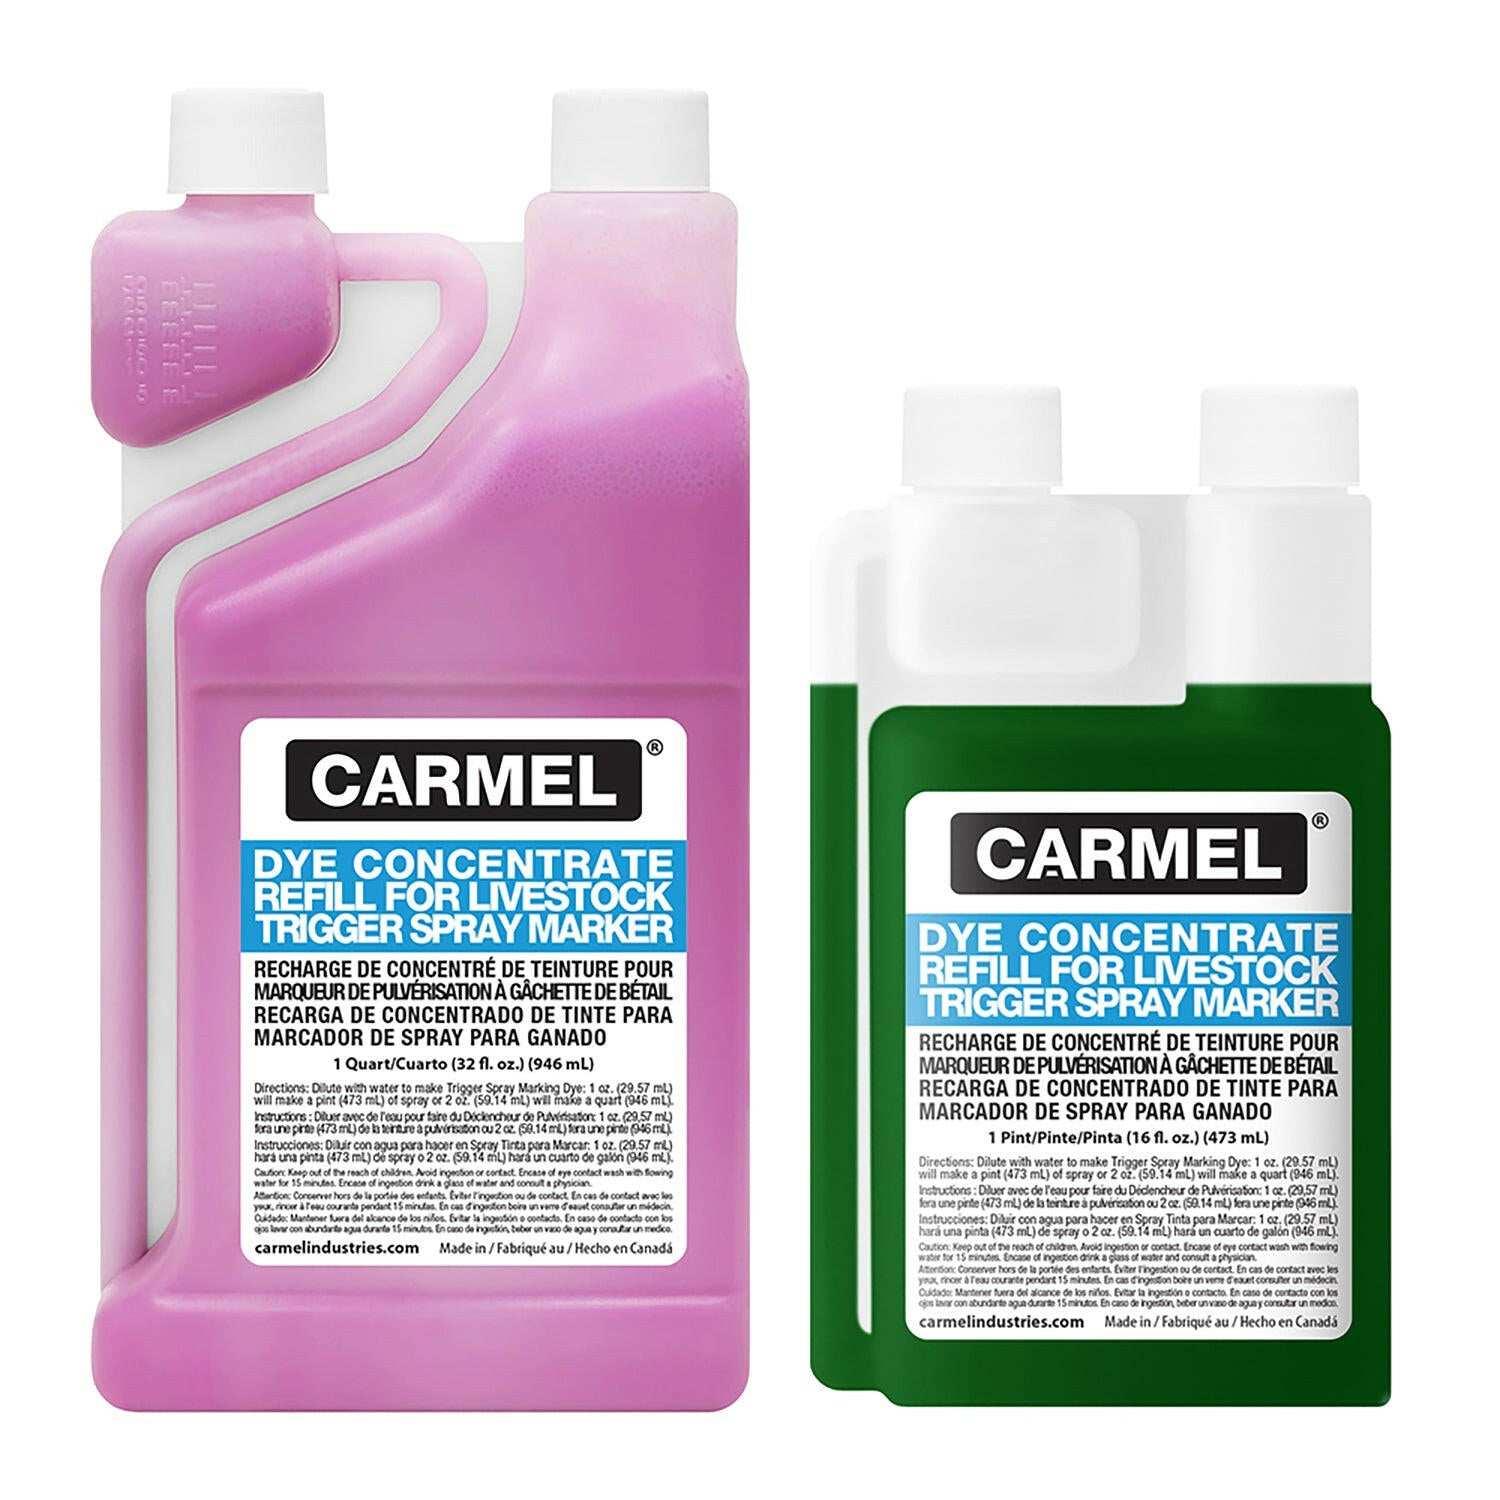 Dye Concentrate Refill for Livestock